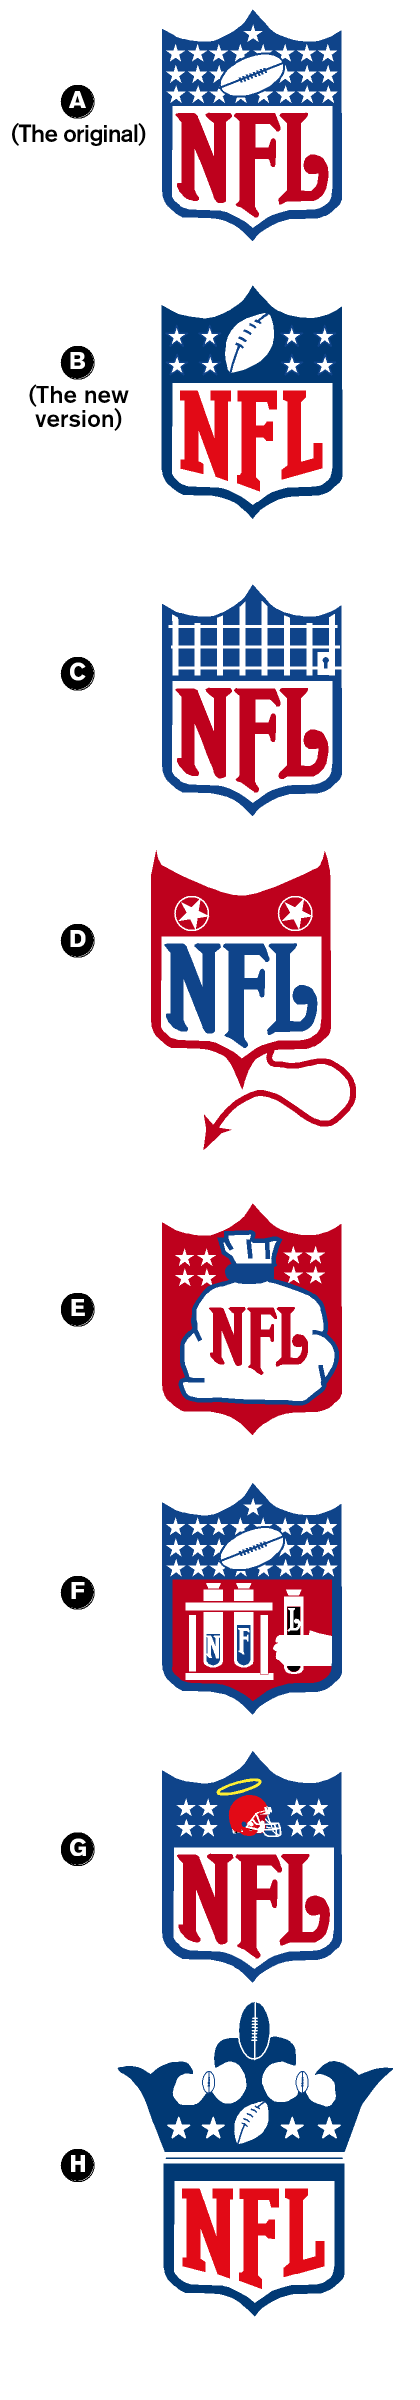 New ESPN Logo - NFL to change it's logo for 2008 Football League